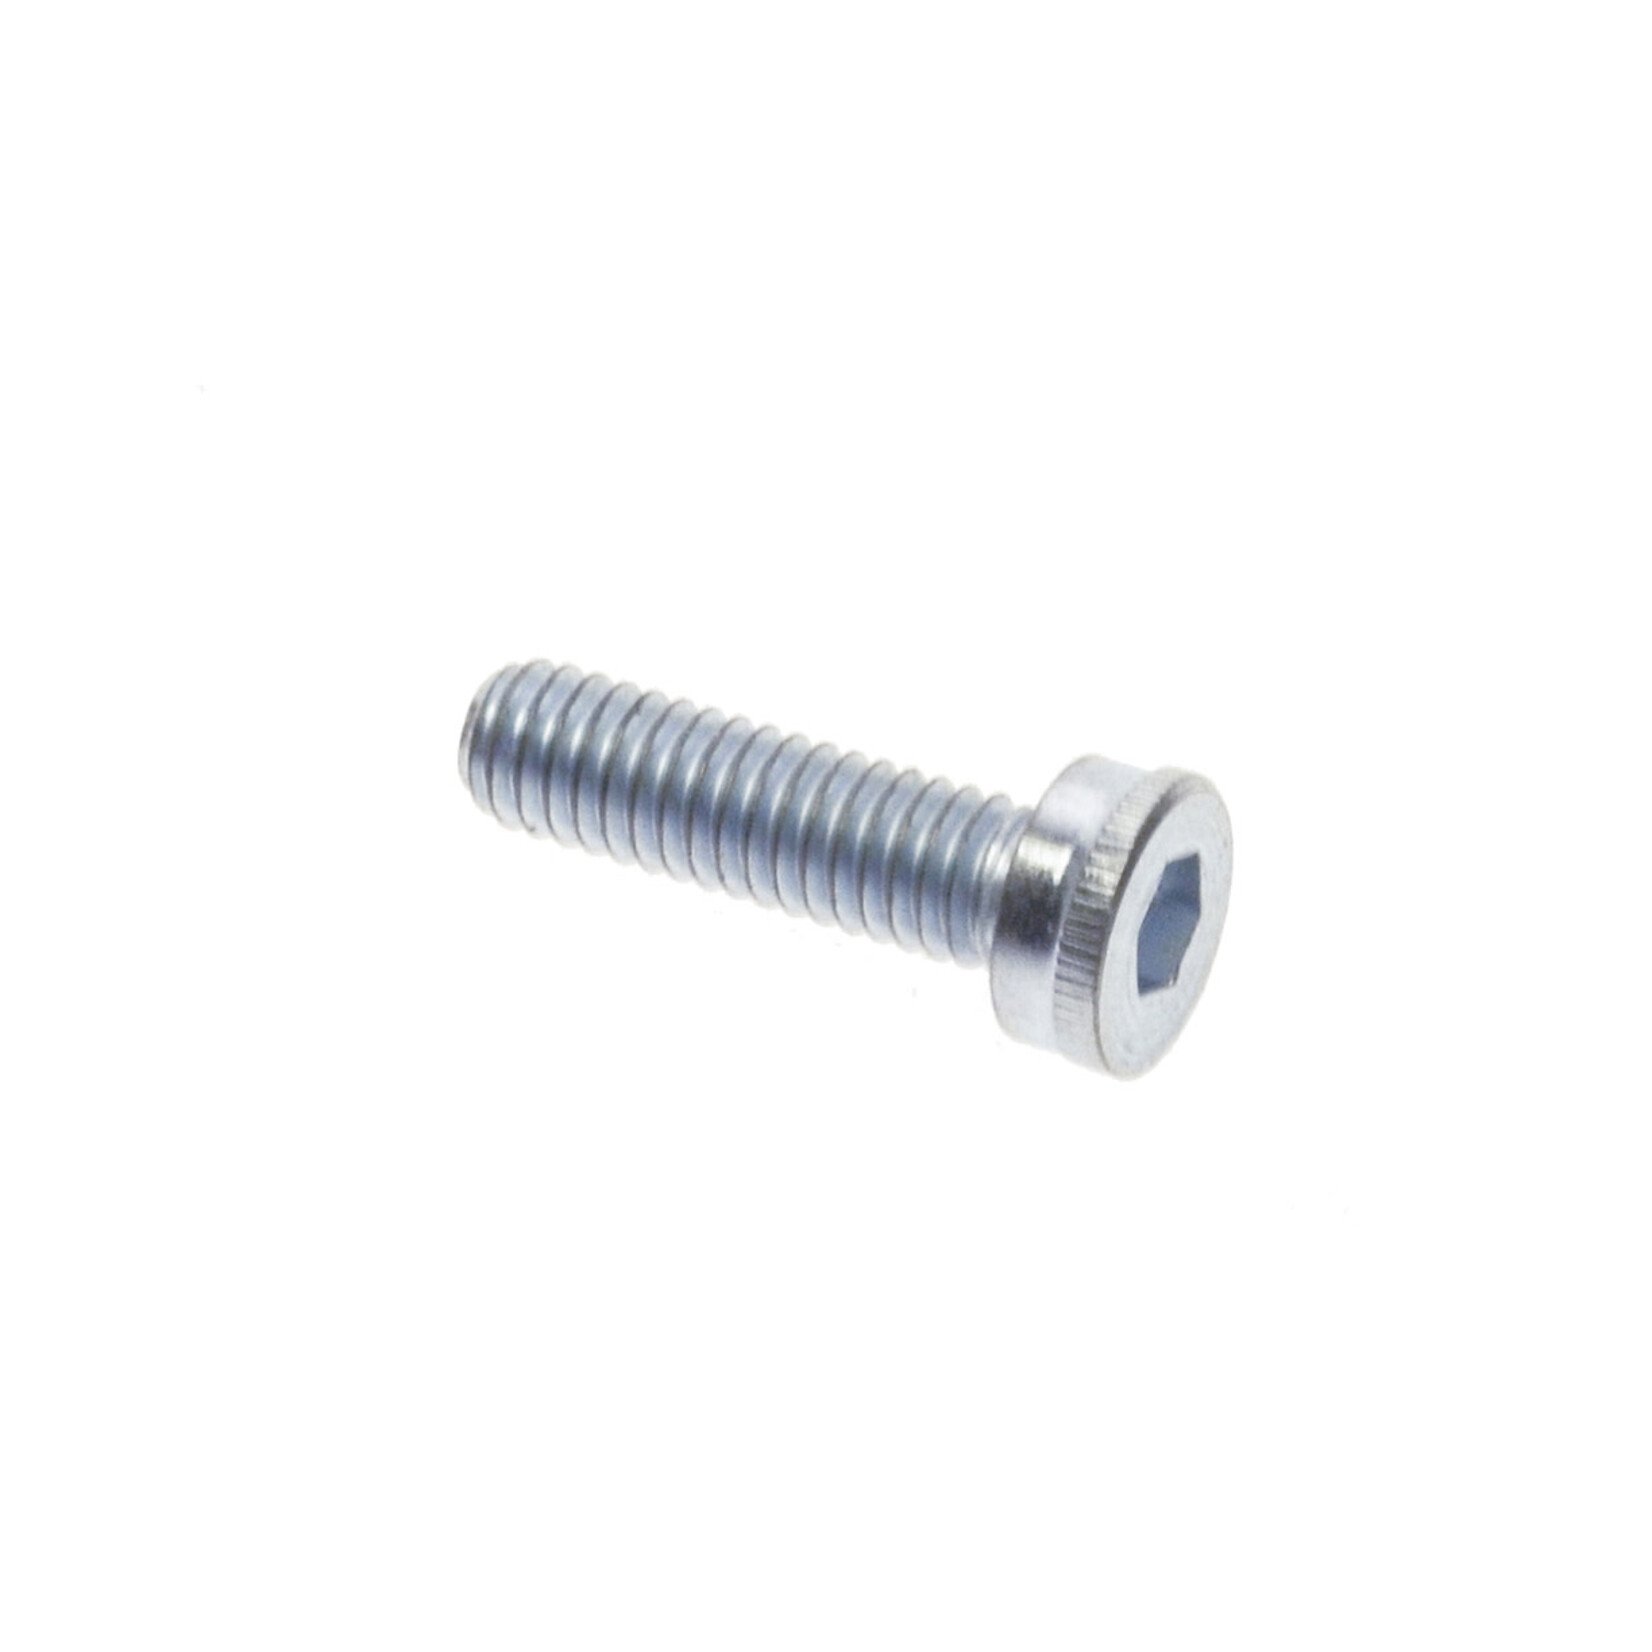 NORCO Norco  Gizmo M4x14mm Mounting Screw